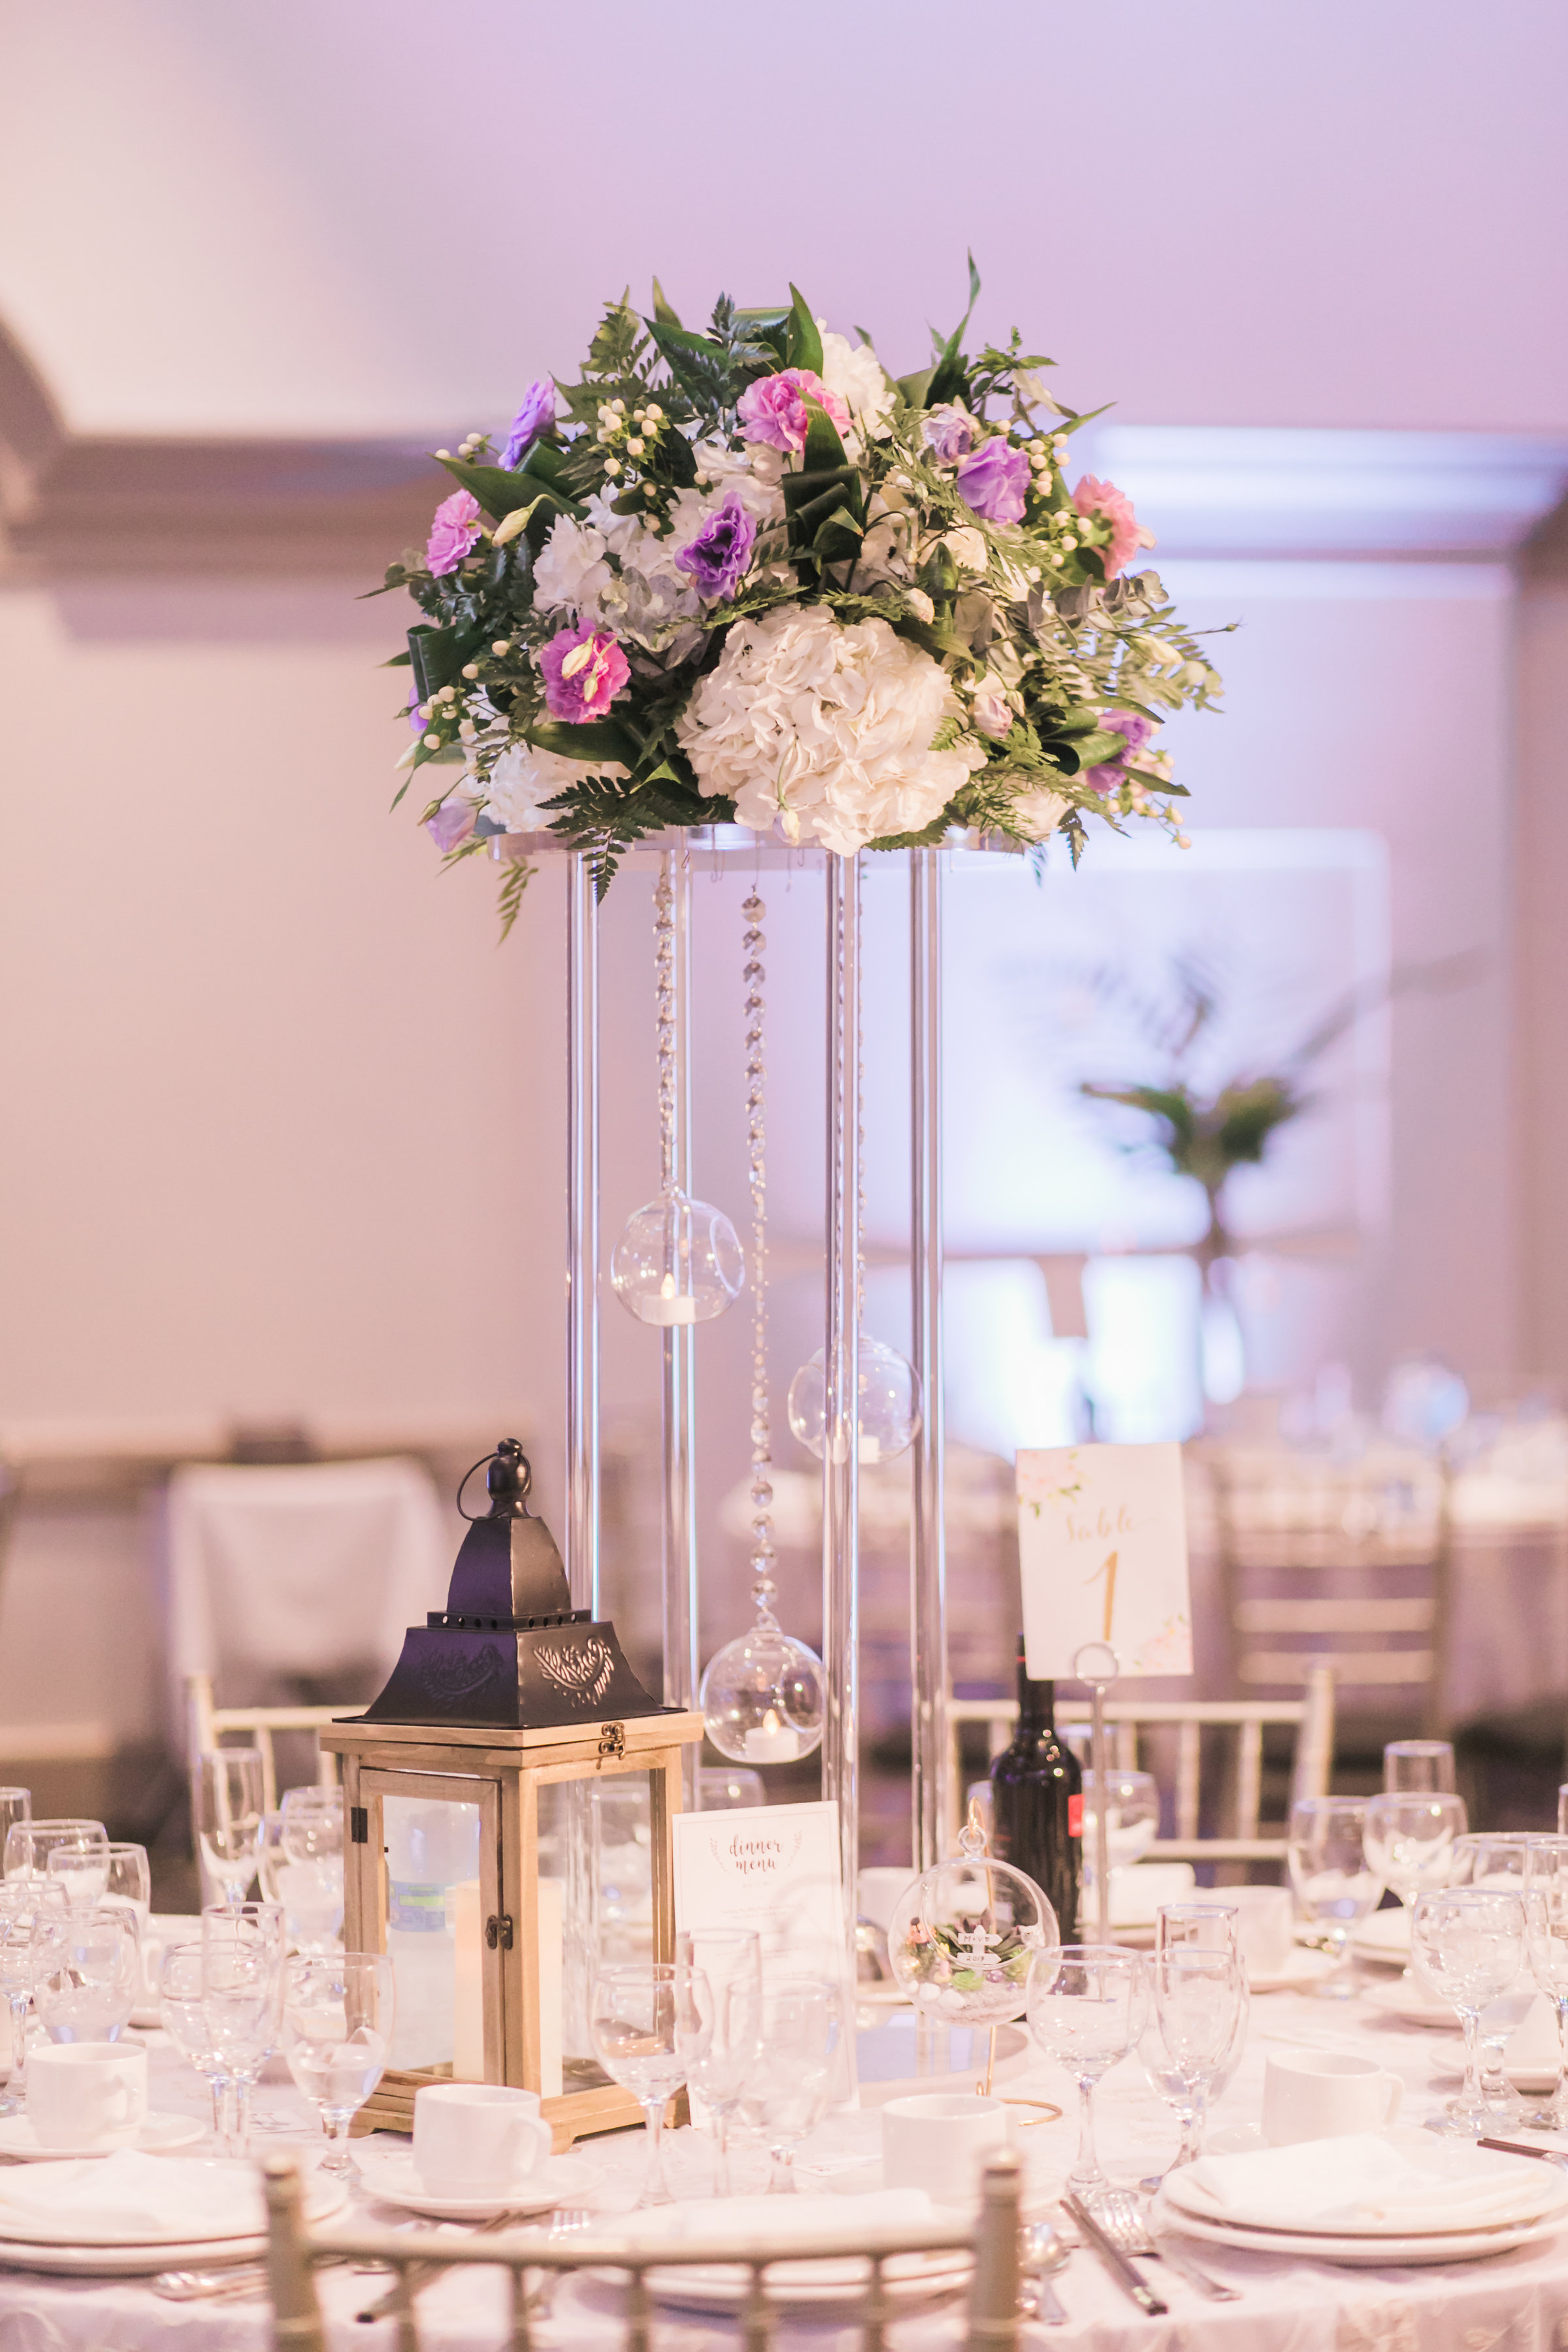 Fresh tall floral centrepiece arrangement, with cream hydrangea, purple lisianthus, and greenery. Suspending glass globes and rustic lantern at side. Toronto wedding flowers and decor at Fontana Primavera by Secrets Floral.